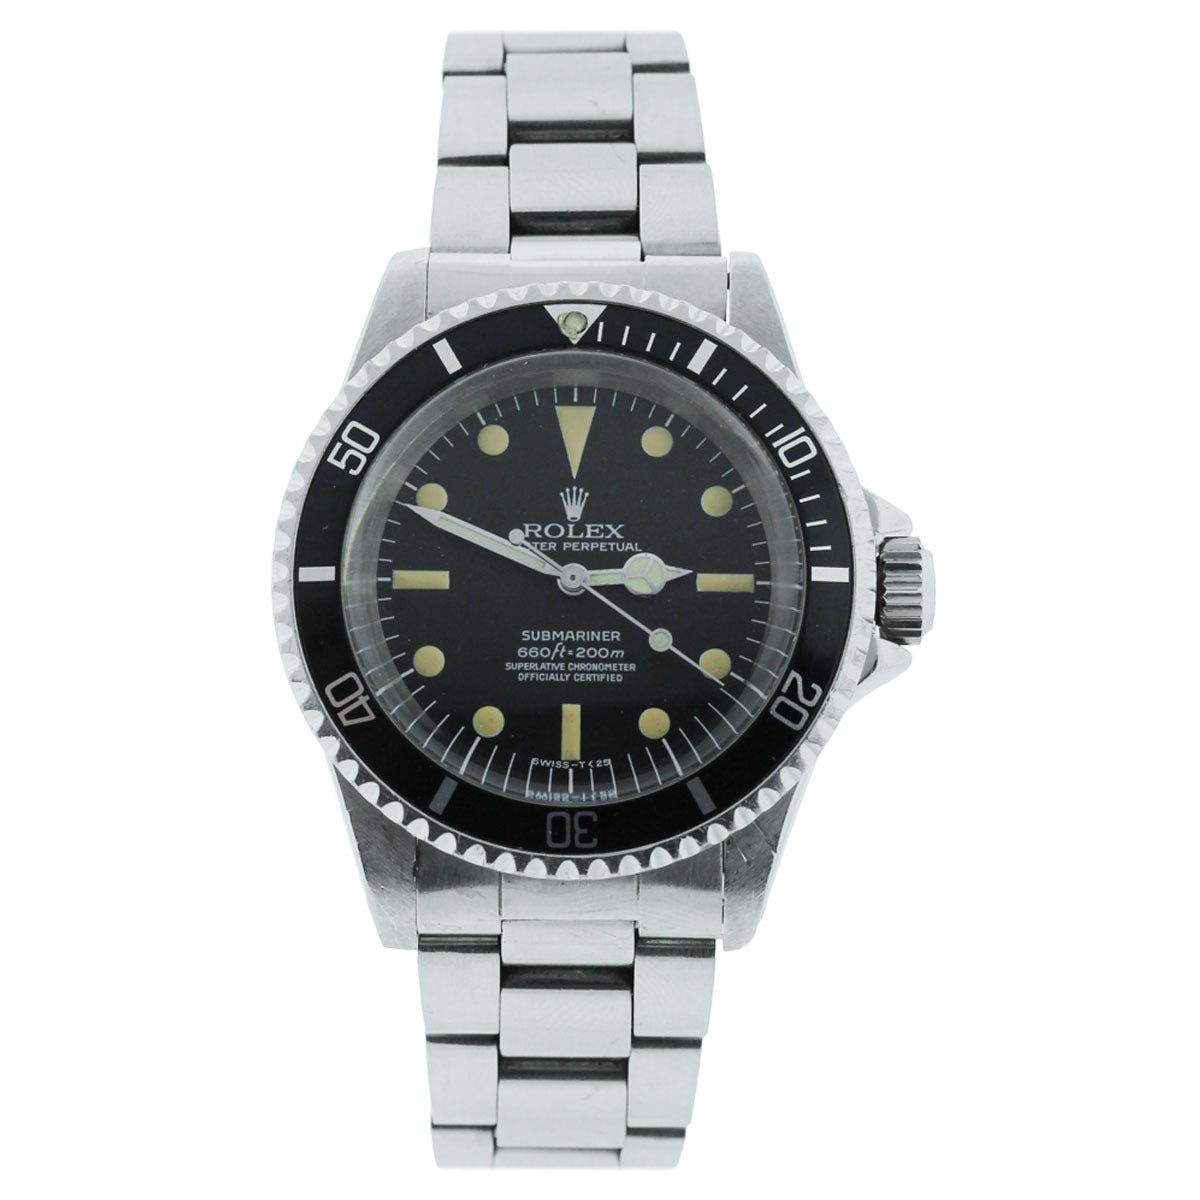 Brand: Rolex
Reference: 5512
Serial: 5 mill.
Case Material: Stainless Steel
Movement: Automatic
Case Measurement: 40mm
Dial: Black dial (factory)
Crystal: Plastic Crystal
Clasp: Fold Over Clasp (with dive suit extension) 
Size: Will Fit a